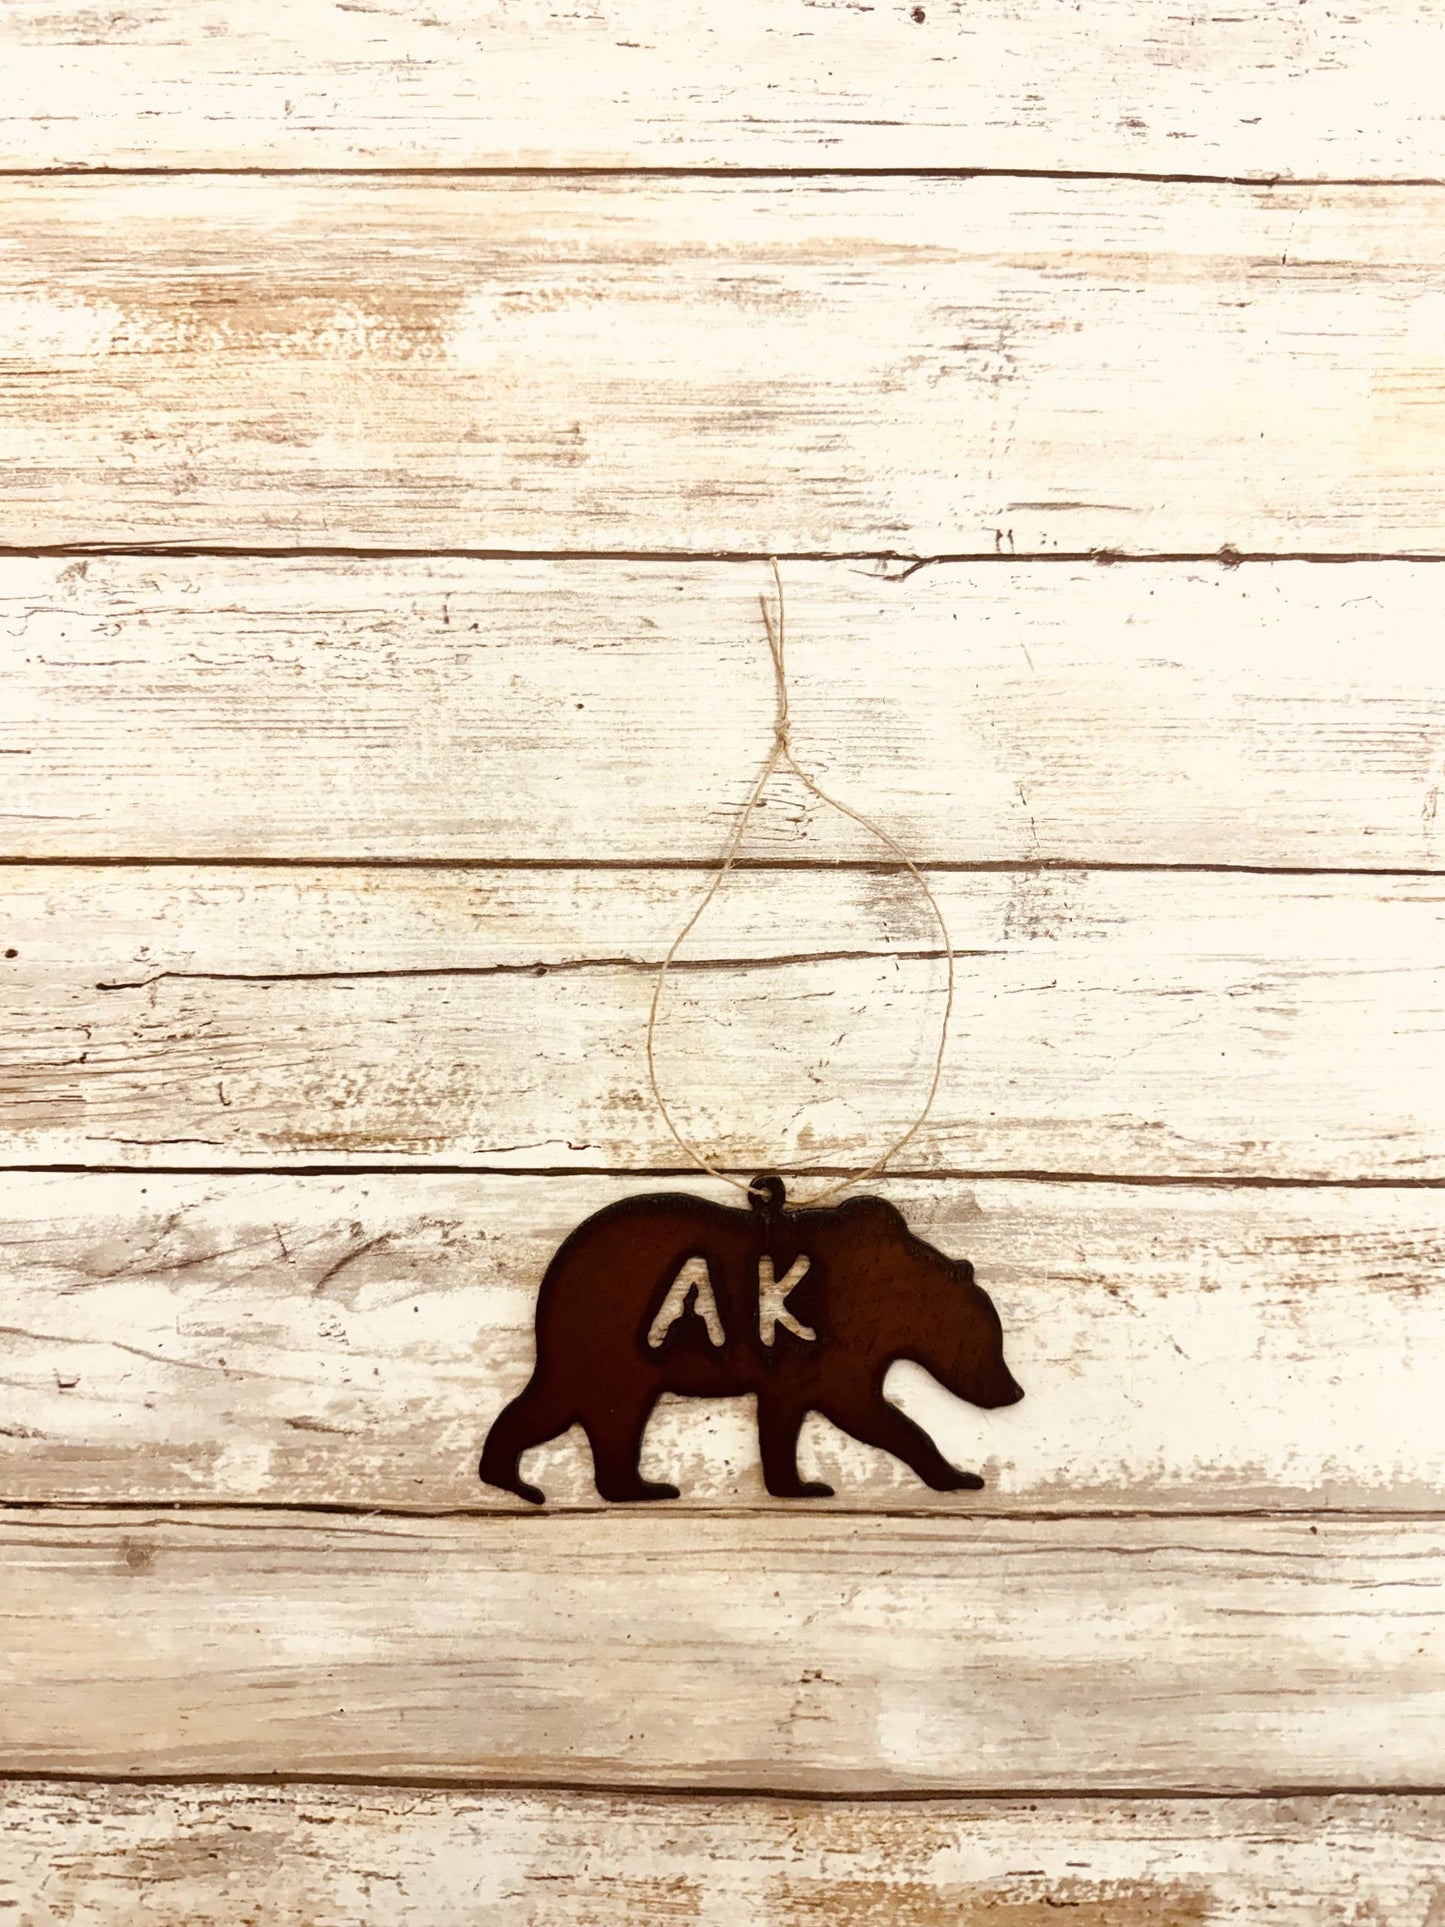 Grizzly Bear Ornament with AK Cutout for Alaska Gift